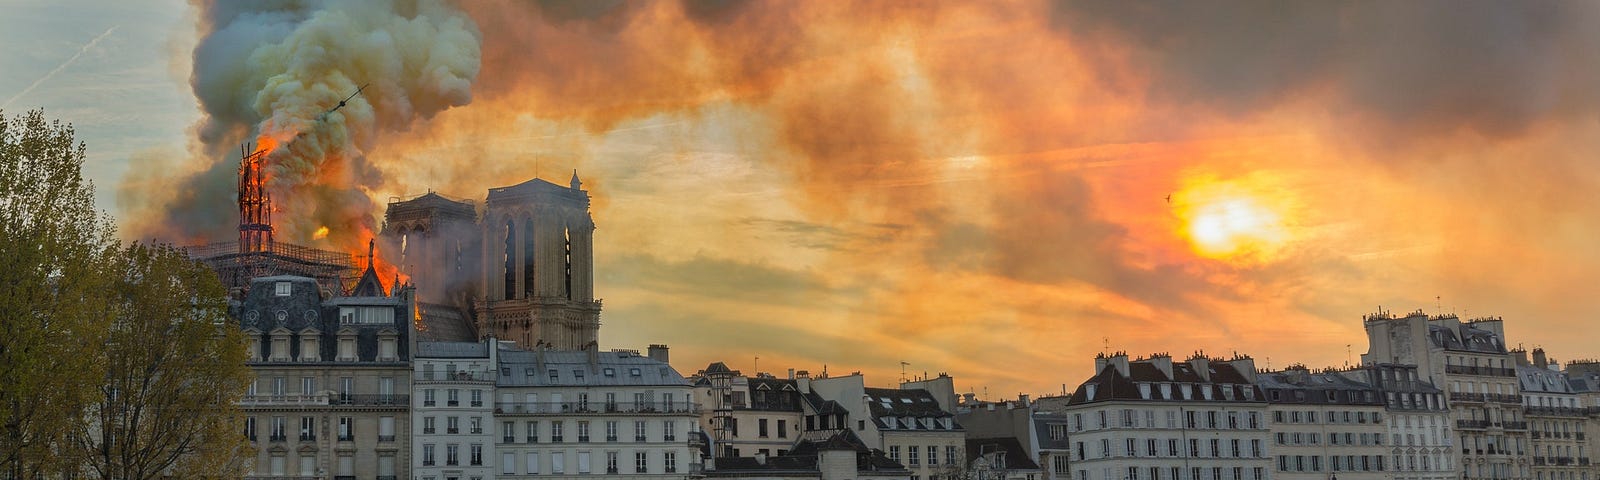 Notre Dame Cathedral Burning, Smoke and fire in an orange sky April 2019